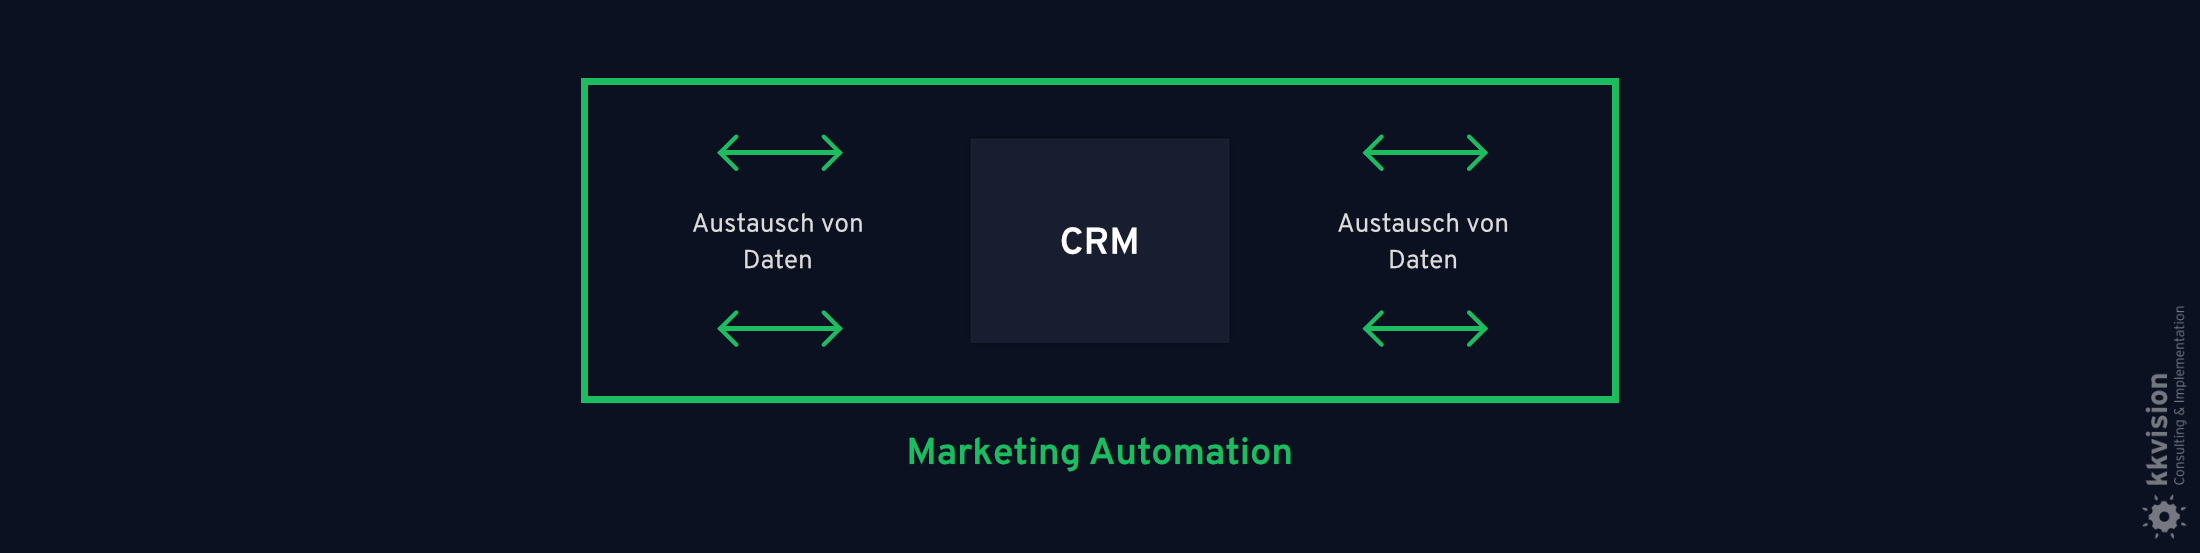 CRM & Marketing Automation_Reporting